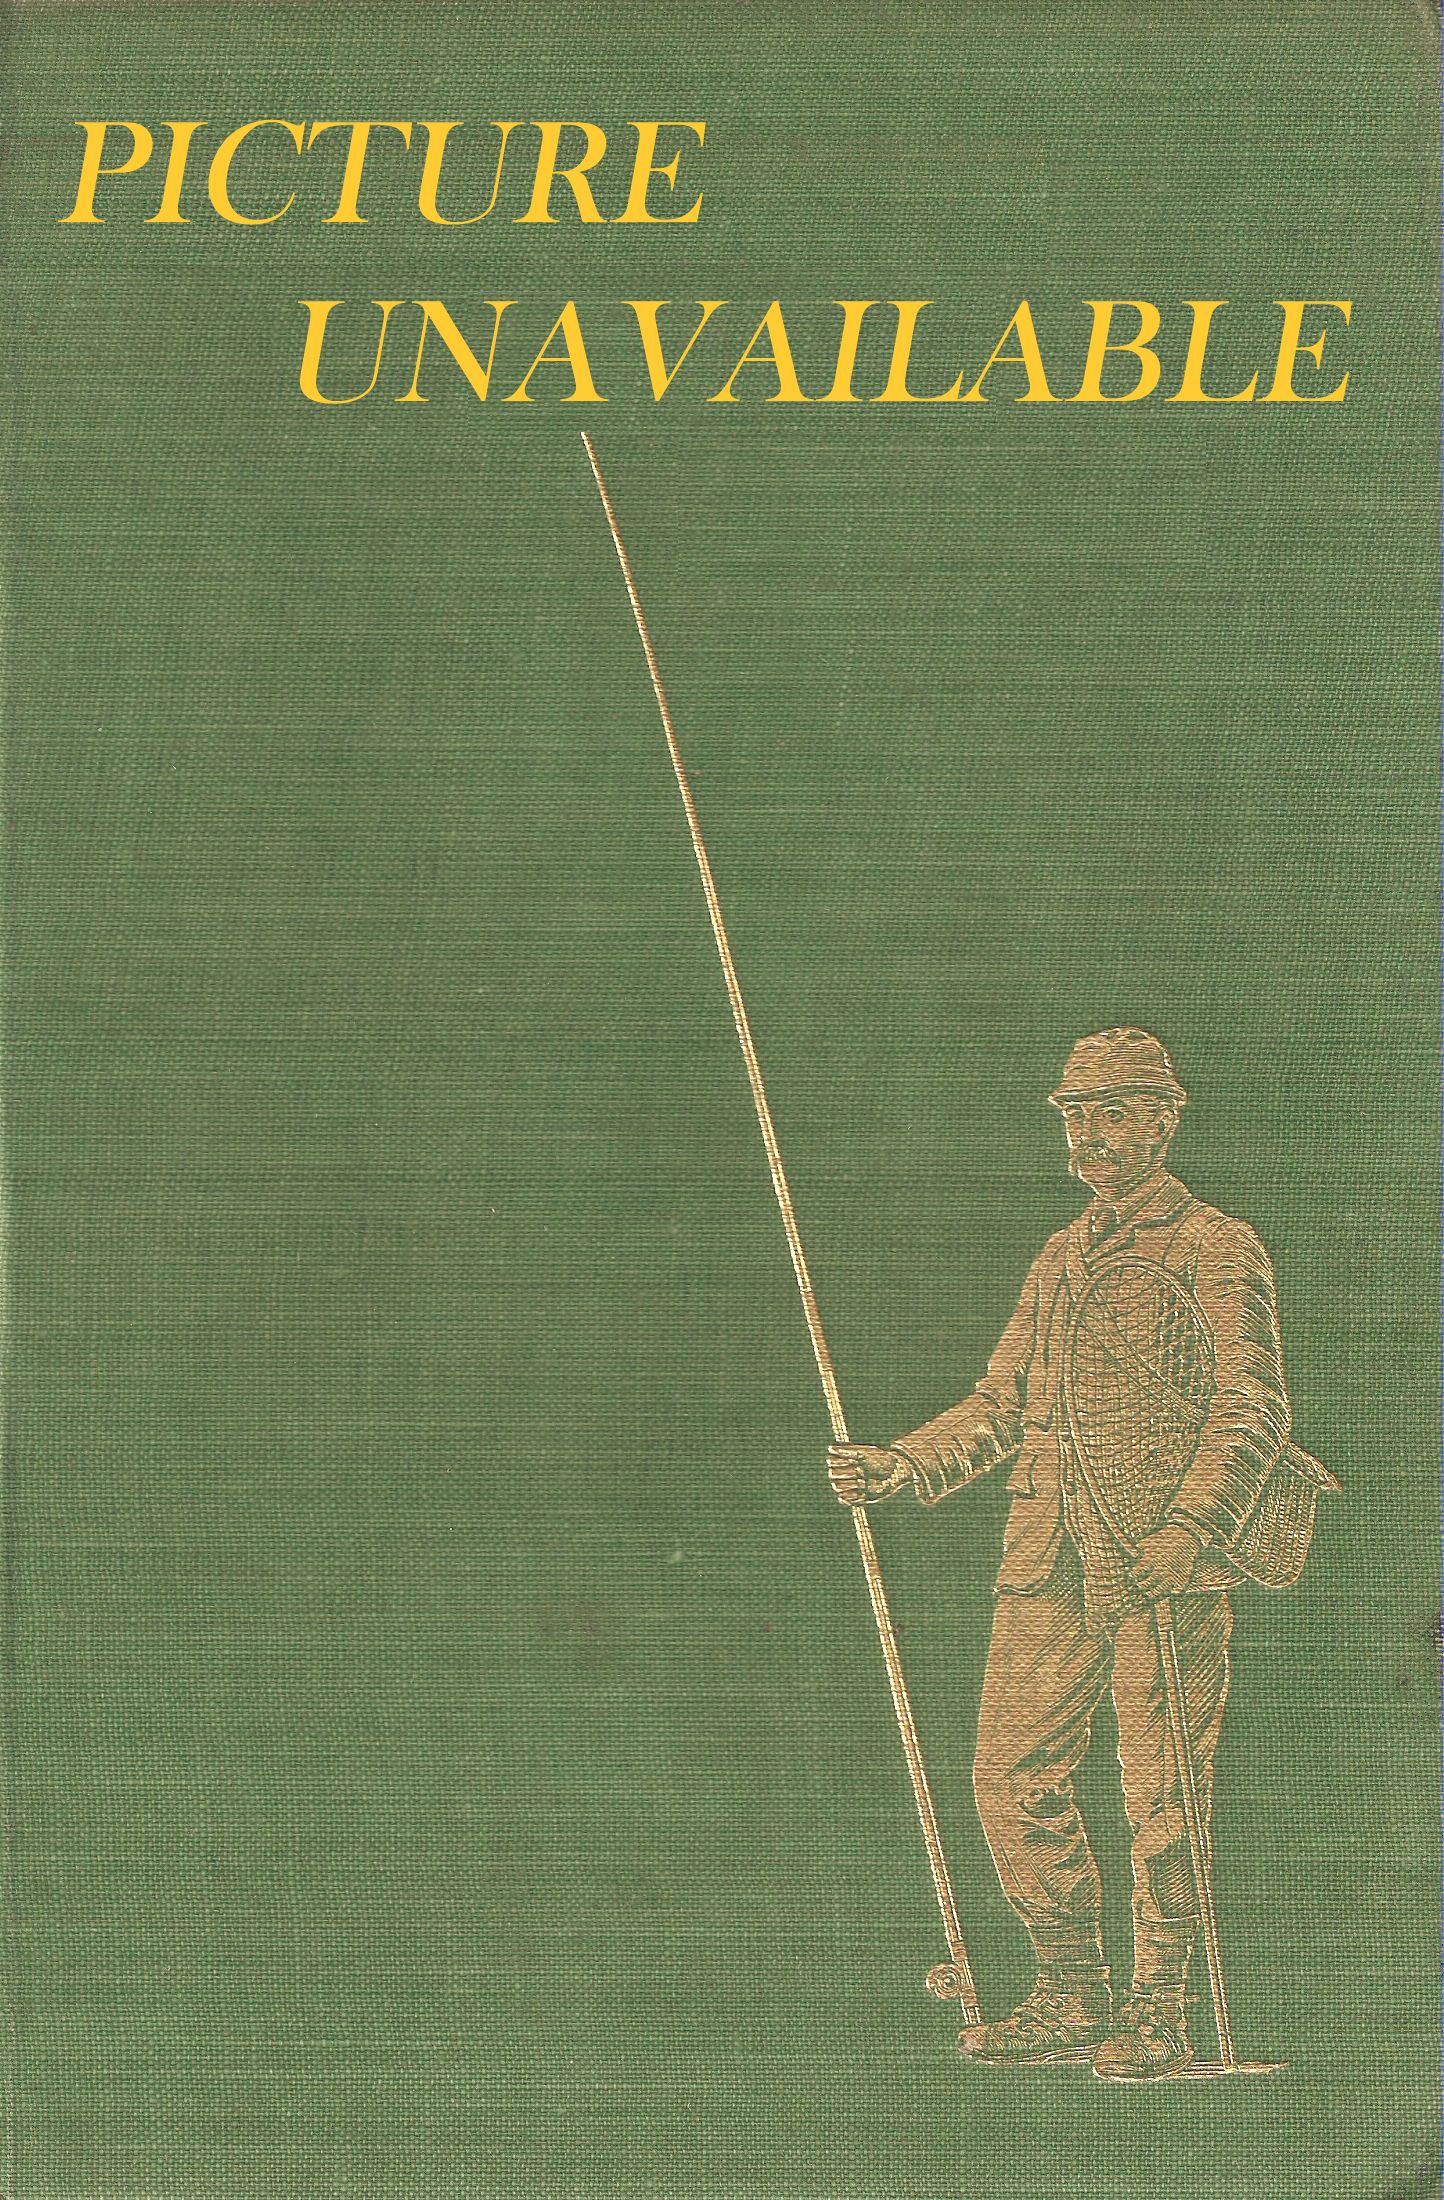 THE PIKE FISHER. By Edward F. Spence.